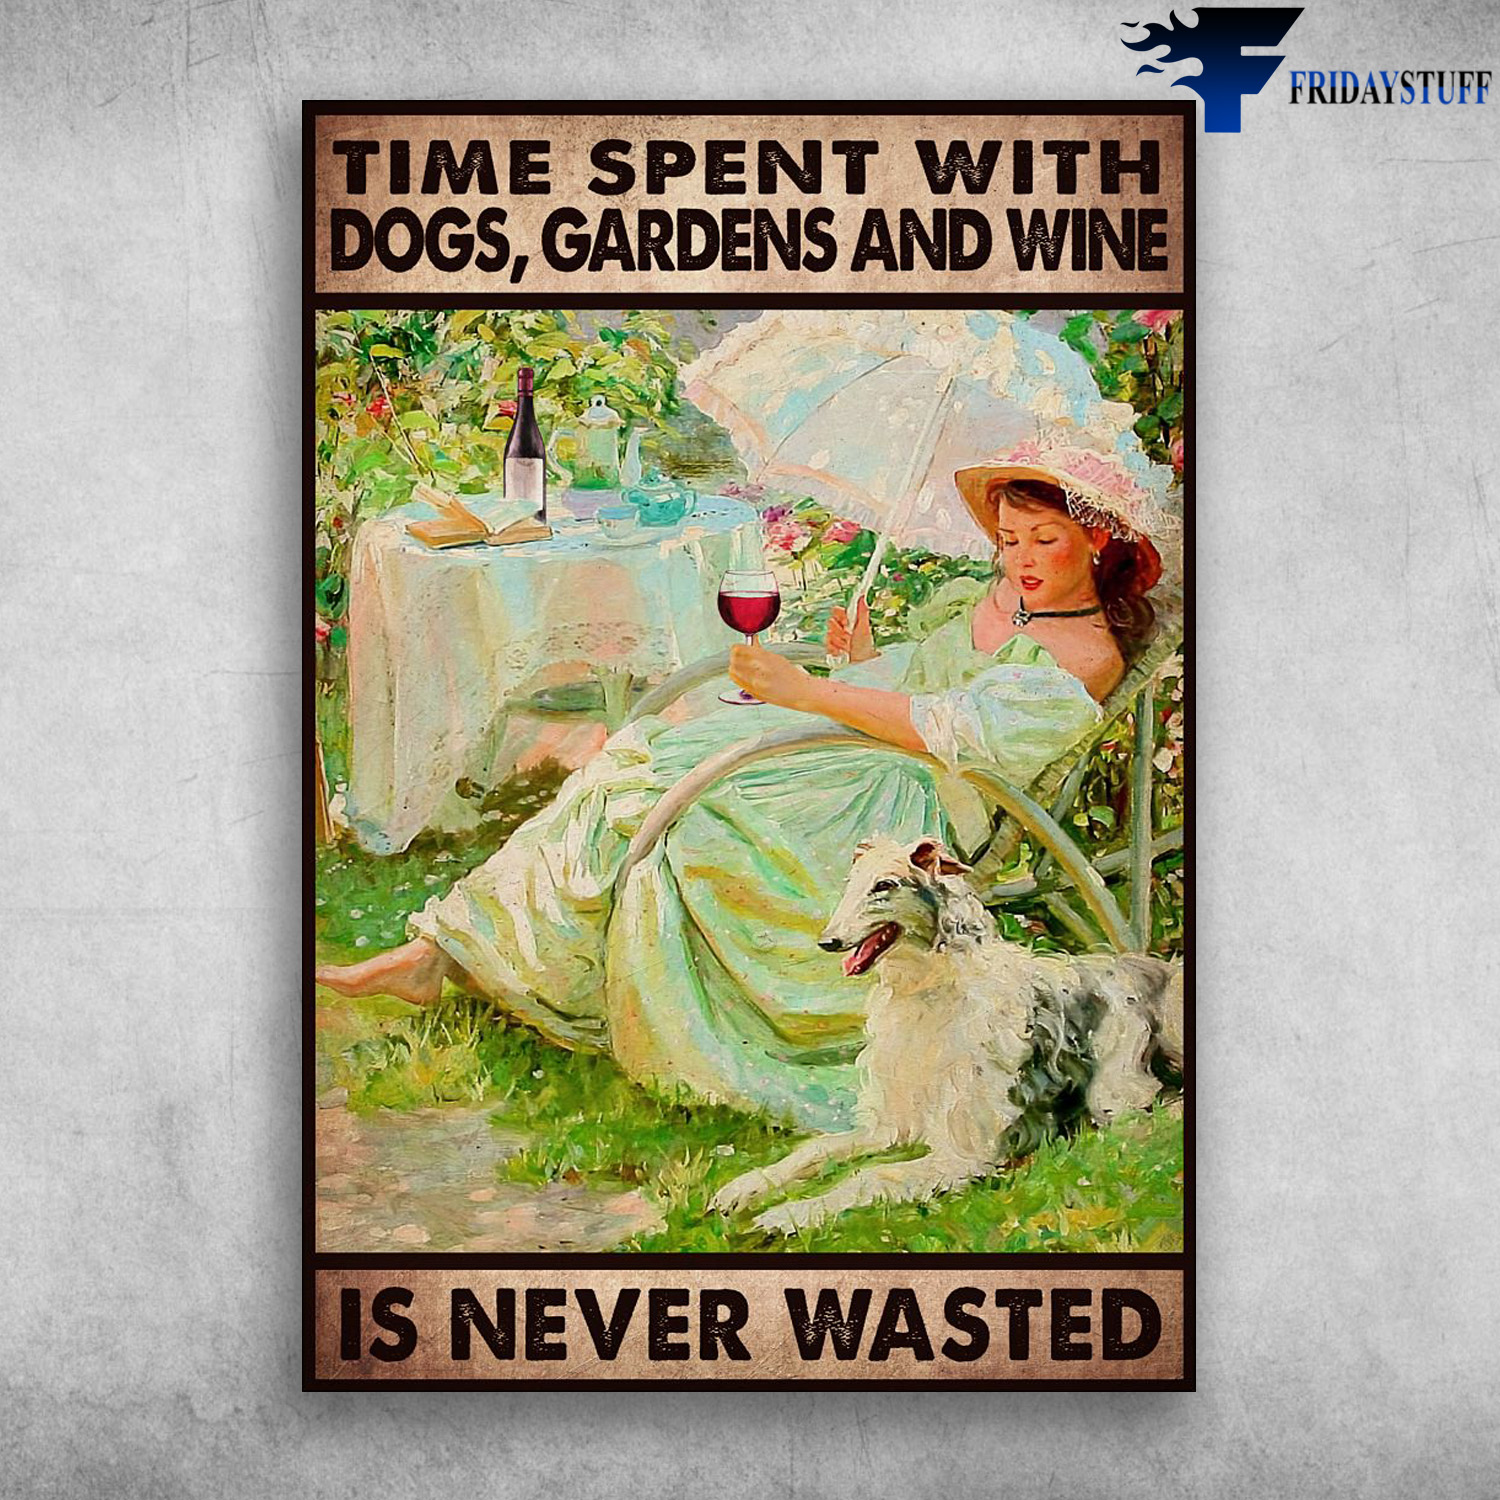 Girl Loves Dog, Garden And Wine, Time Spent With Dogs, Gardens And Wine, Is Never Wasted, Books And Wine